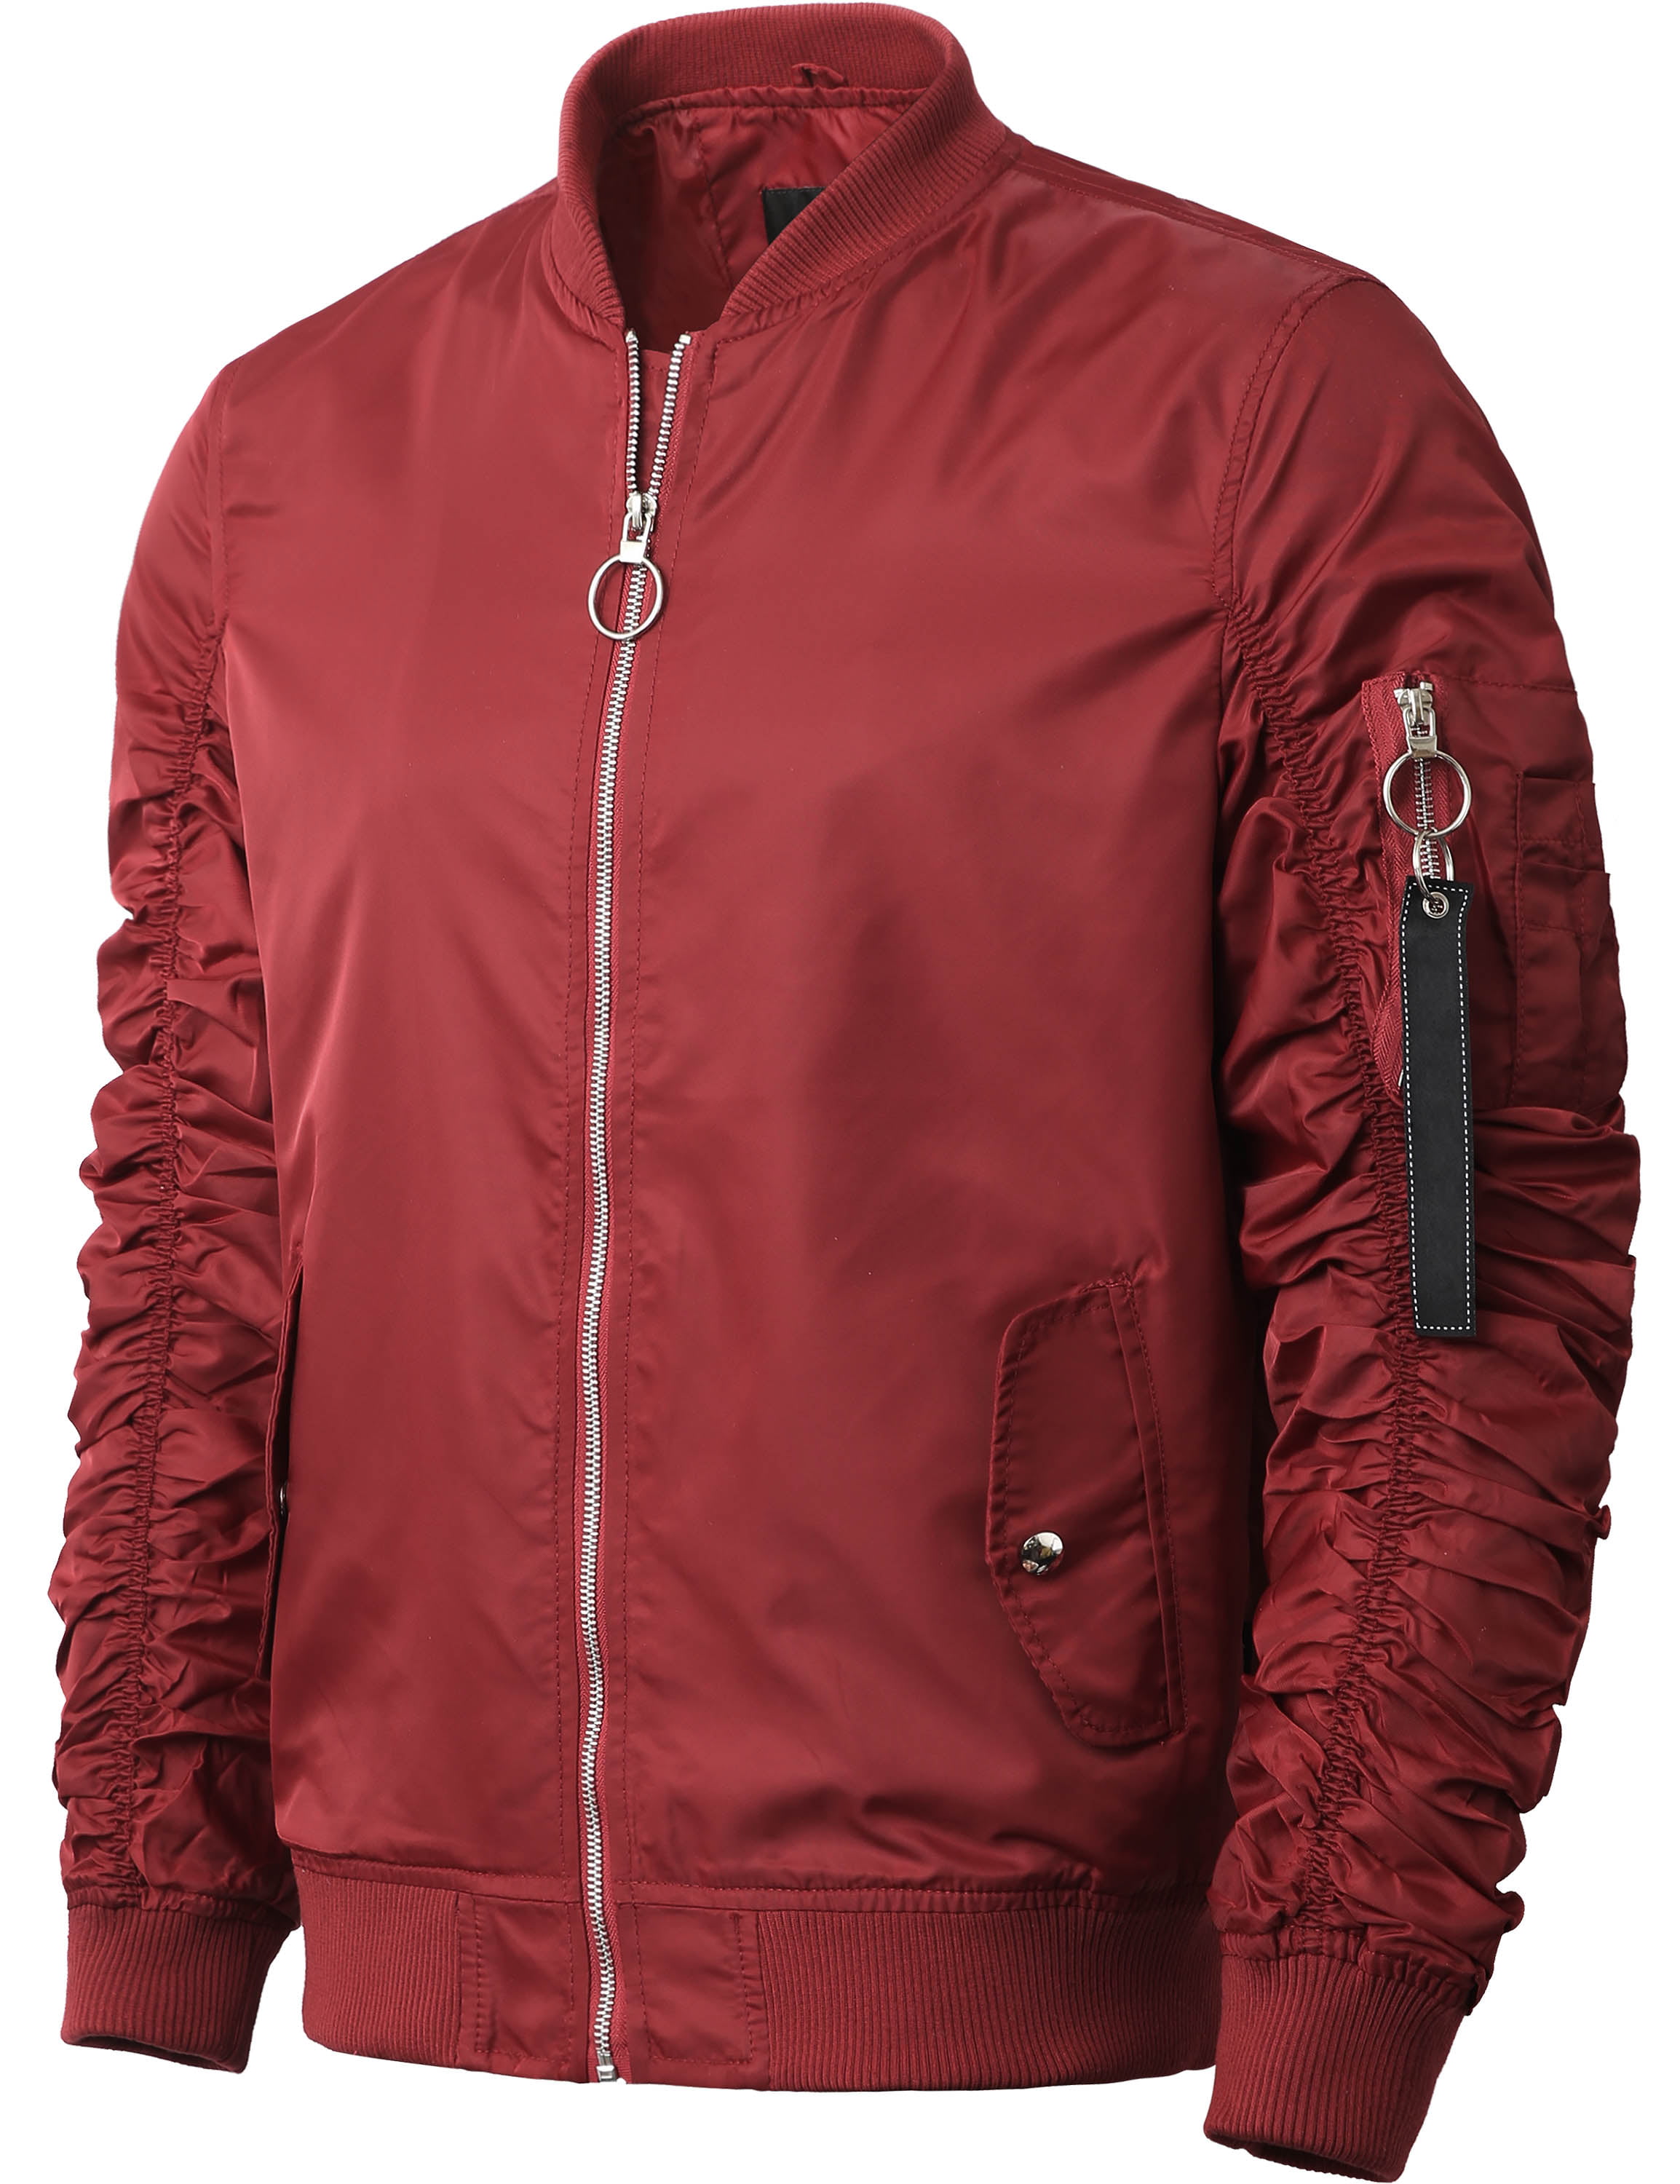 Ma Croix - Ma Croix Mens Ruched Bomber Jacket Lightweight Waterproof ...